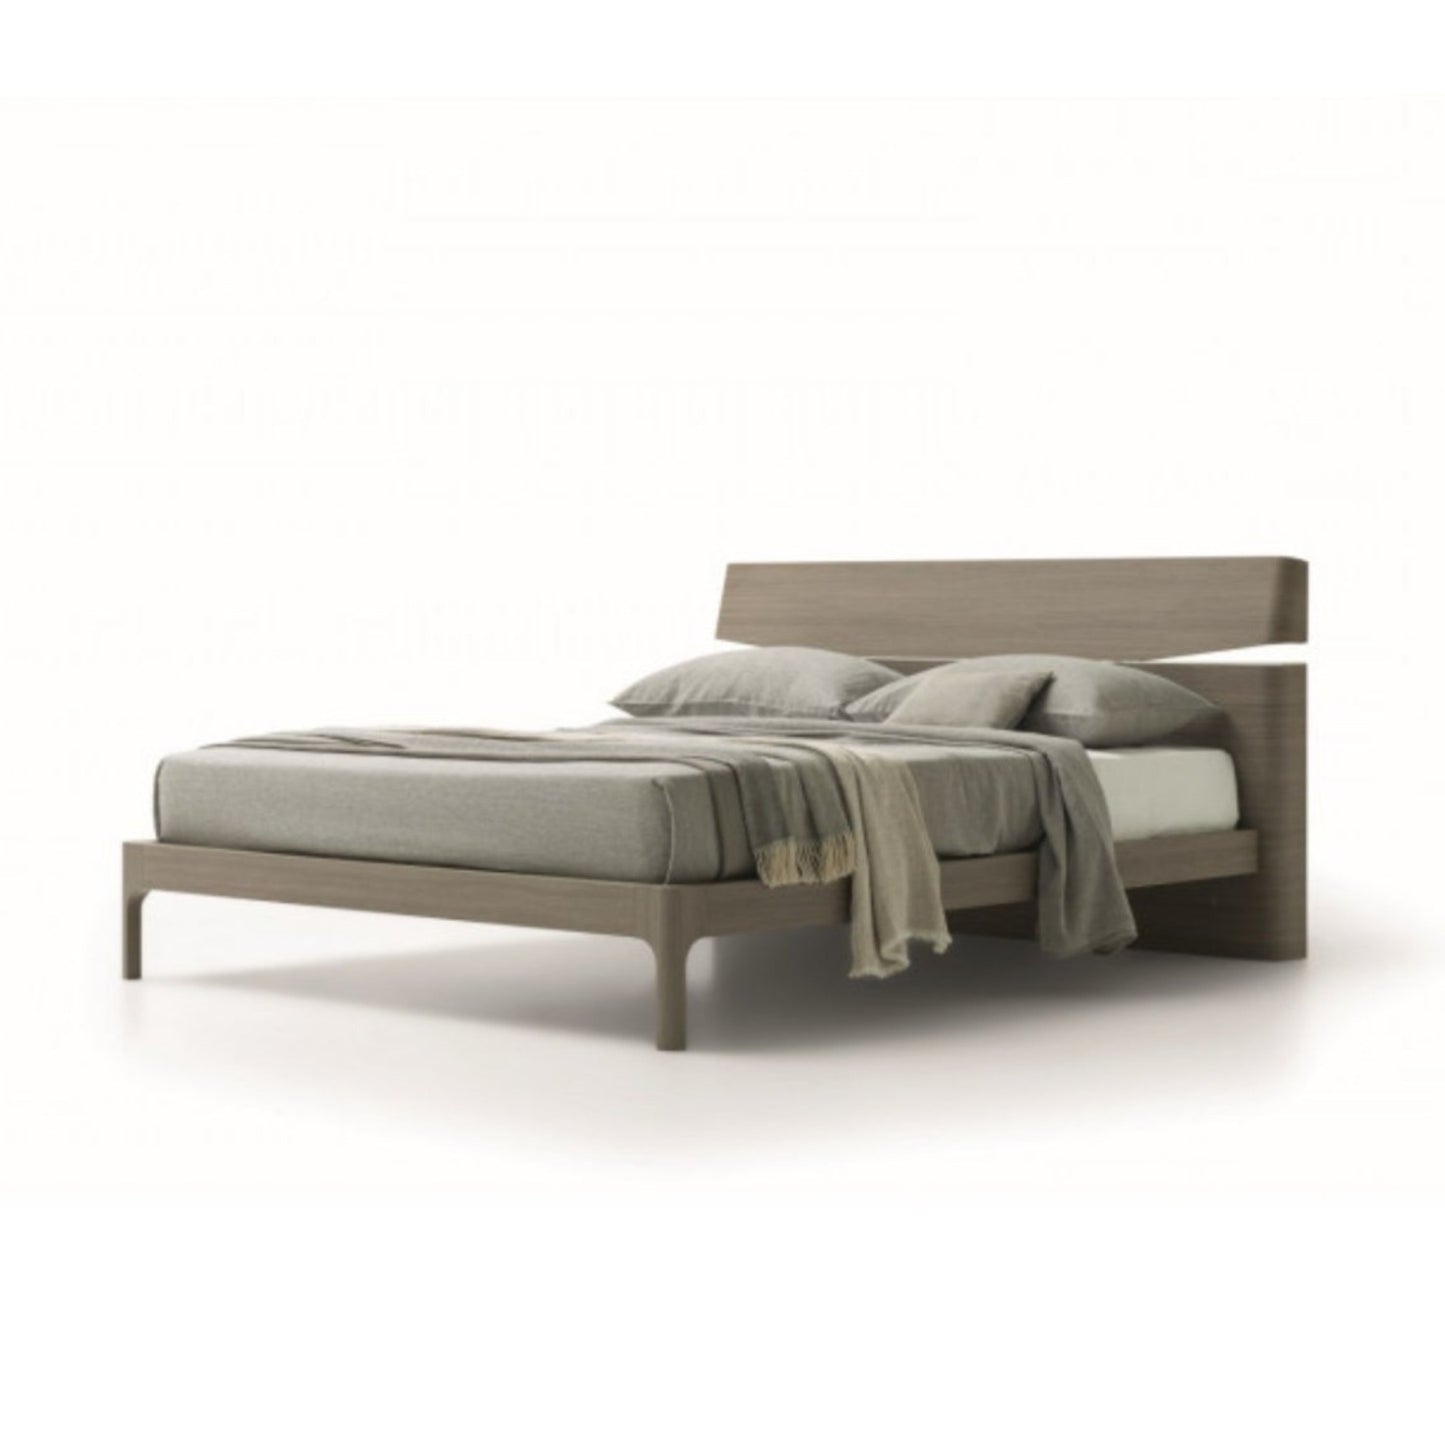 Grecale Wooden Bed by Santa Lucia